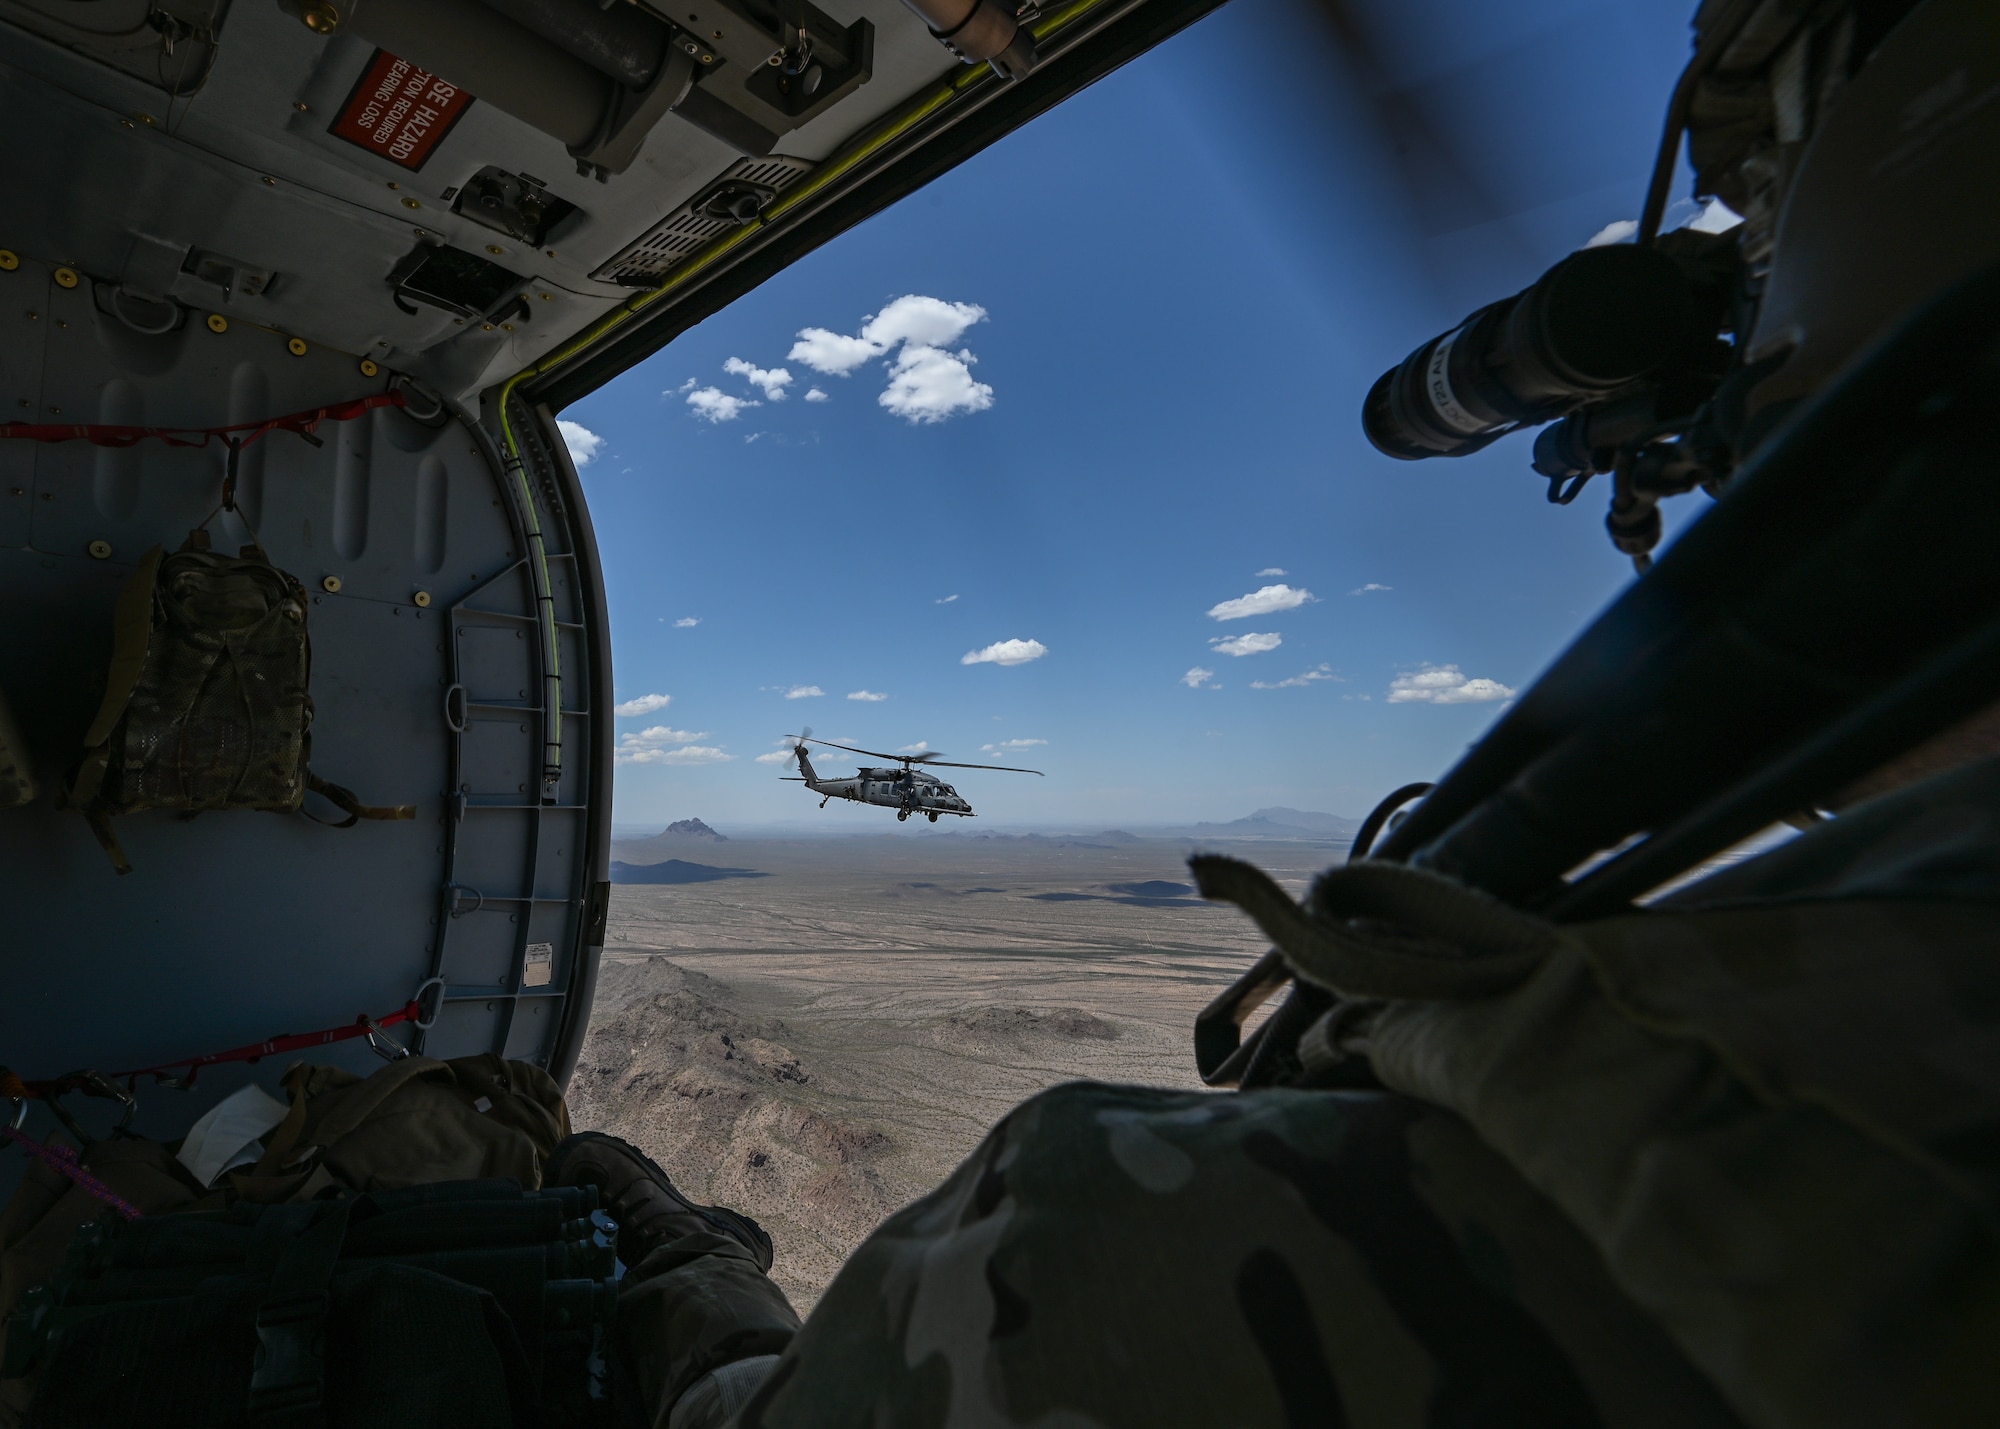 A man in a military watches a helicopter fly over the desert.